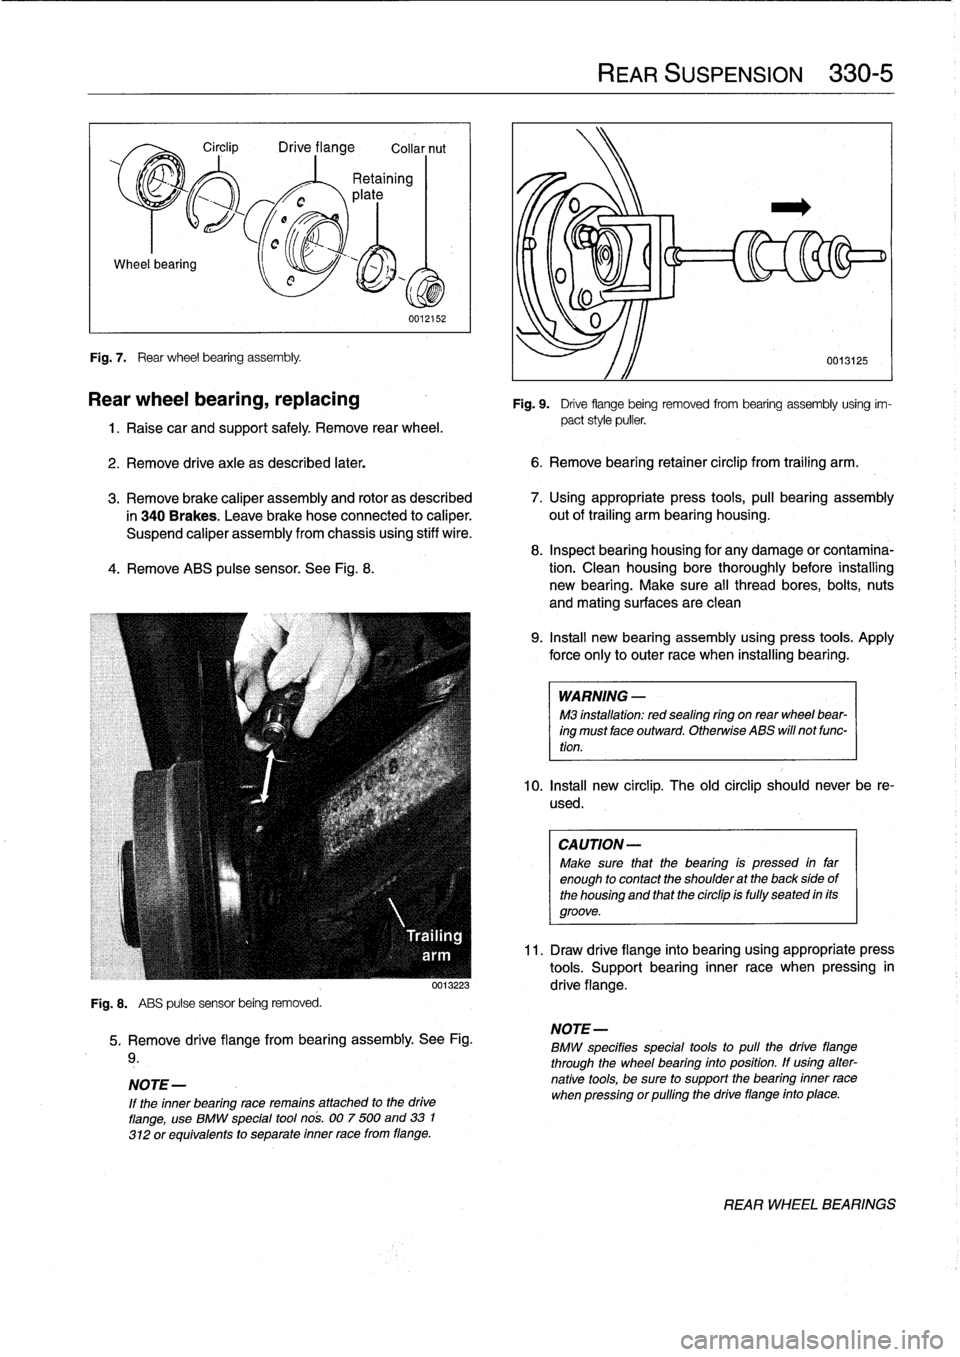 BMW 323i 1993 E36 Owners Manual Wheel
bearing

Fig
.
7
.

	

Rear
wheel
bearing
assembly
.

Circlip

	

Drive
flange

	

Collar
nut

0012152

Rear
wheel
bearing,
replacing

1
.
Raise
car
and
support
safely
.
Remove
rear
wheel
.

2
.